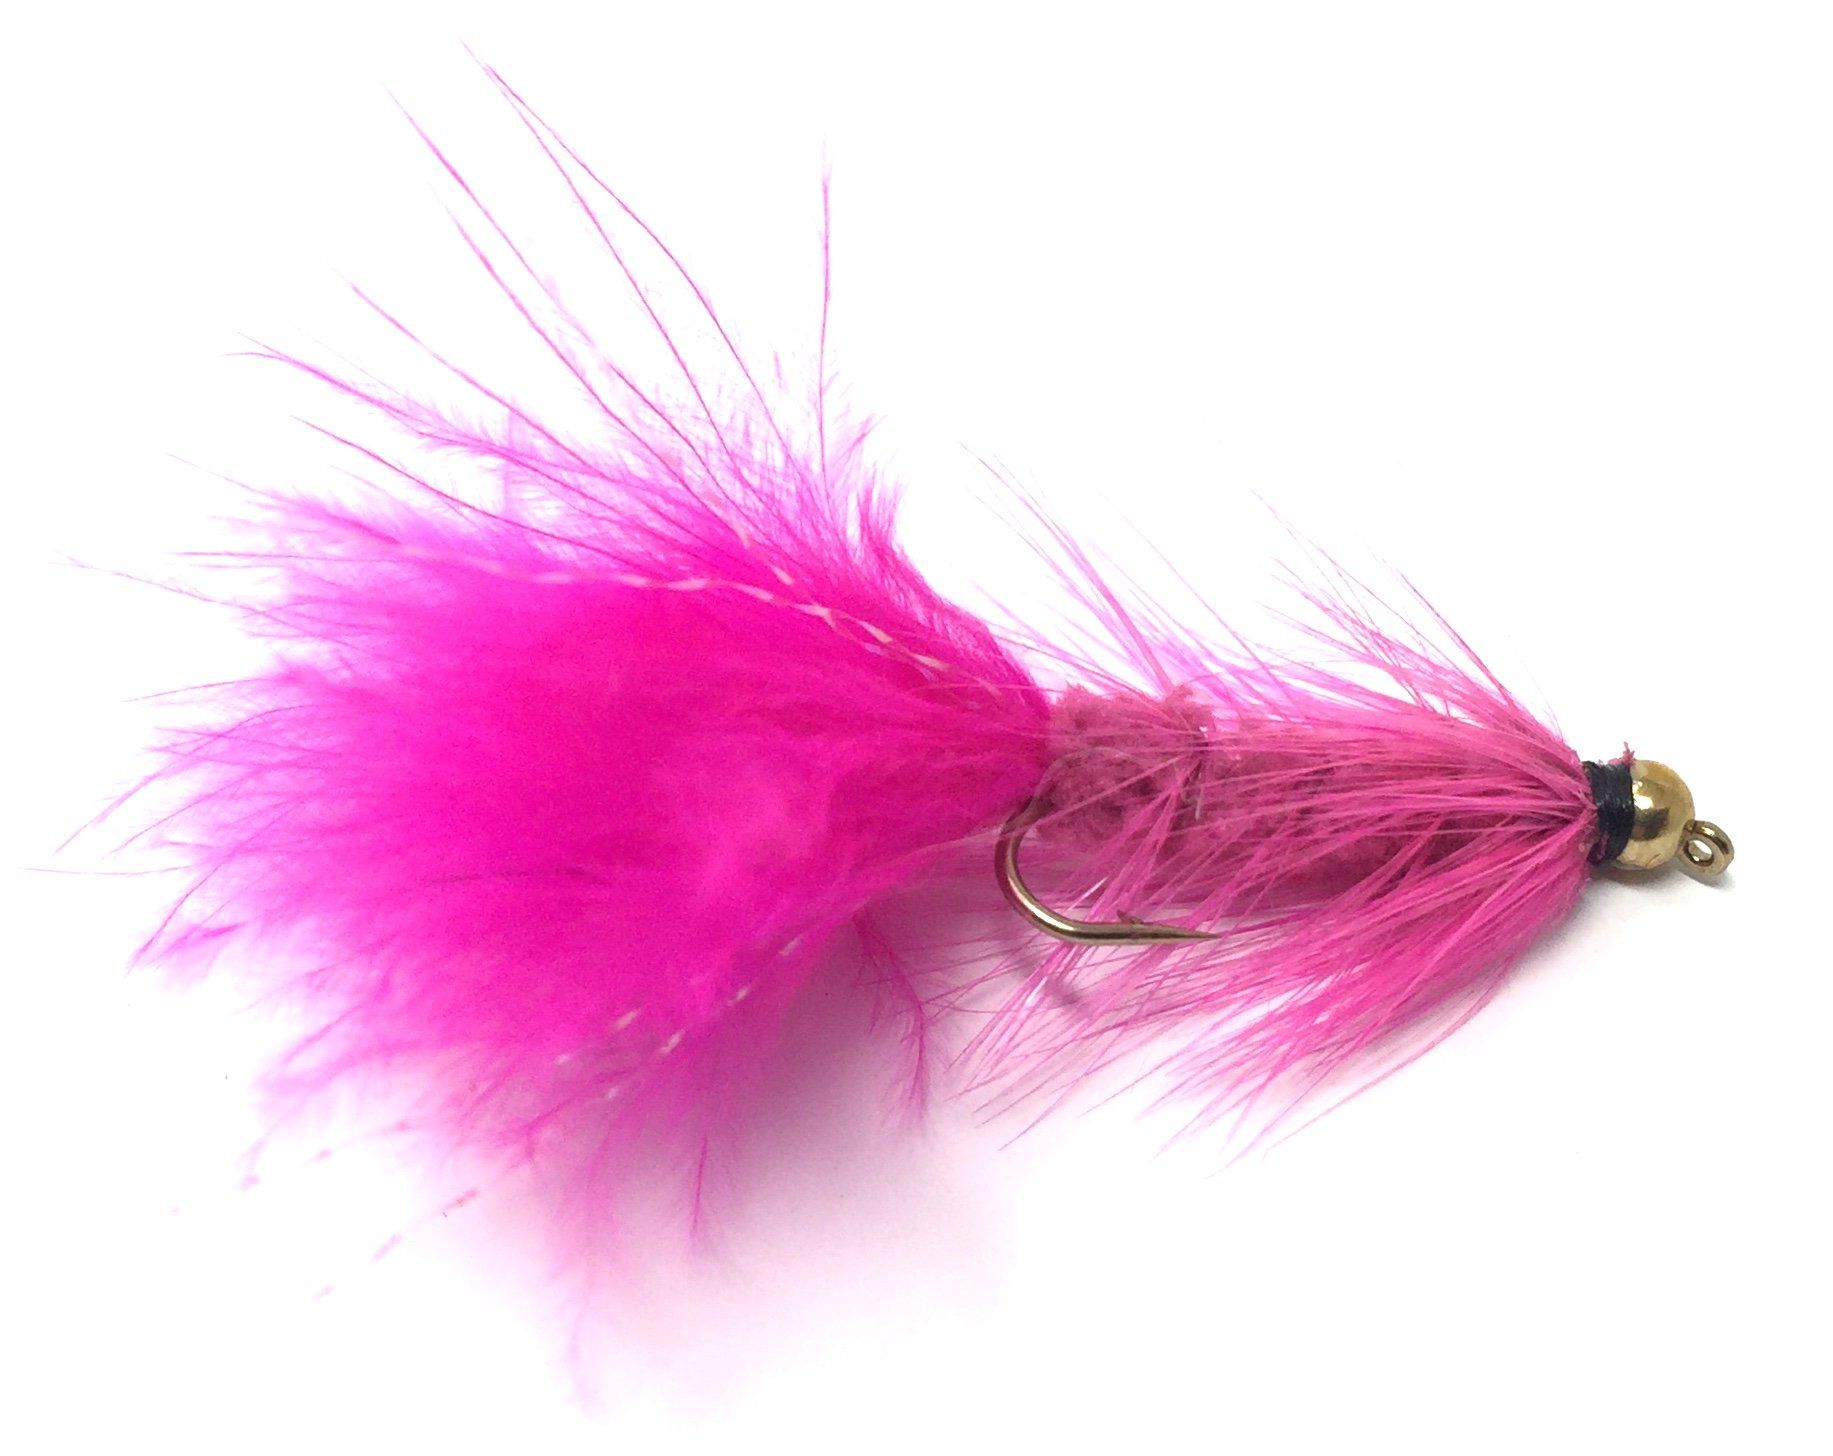 Wooly Bugger Fly Fishing Streamer Assortment - Hand Tied Feeder Creek